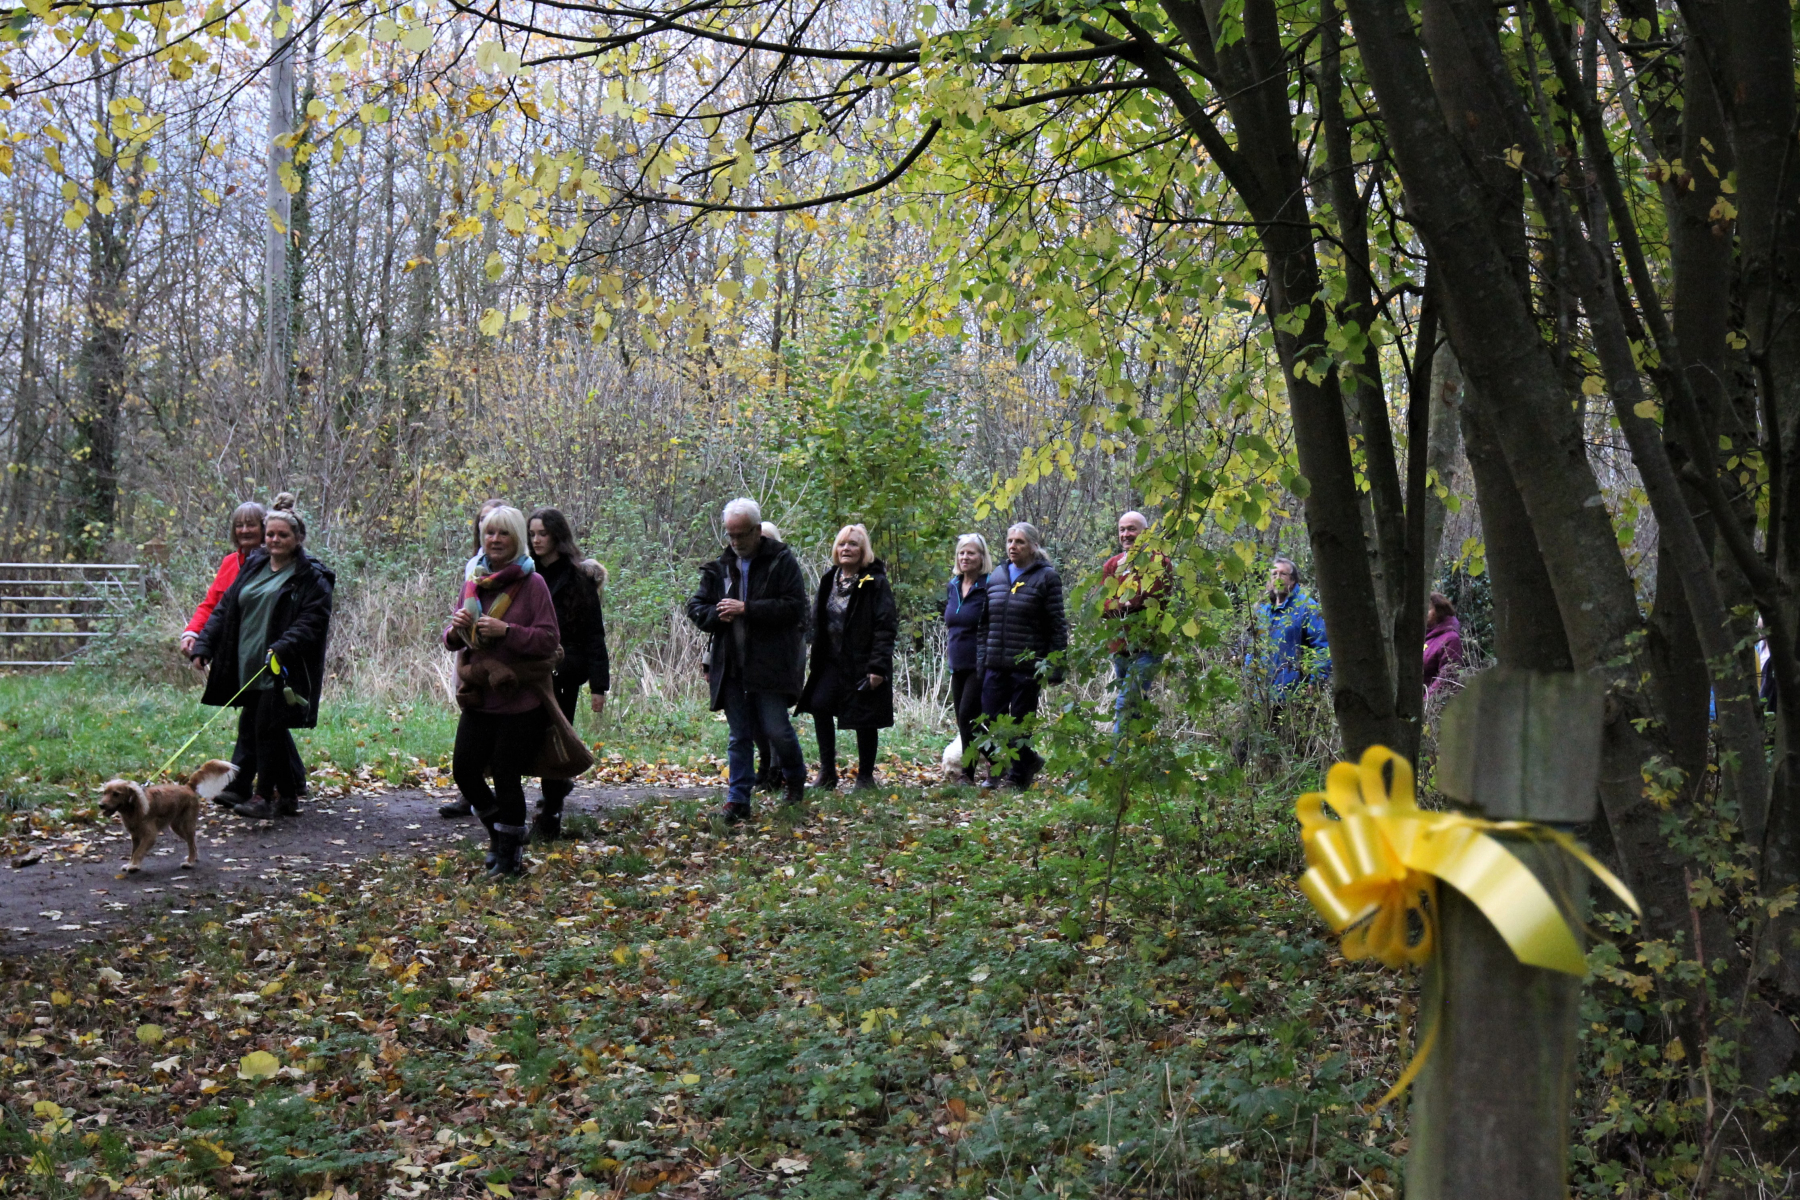 Hucknall-Against-Whyburn-Farm-Development-Group-Walking-Through-Dob-Park-With-Yellow-Ribbon-In-Foreground-13-11-21